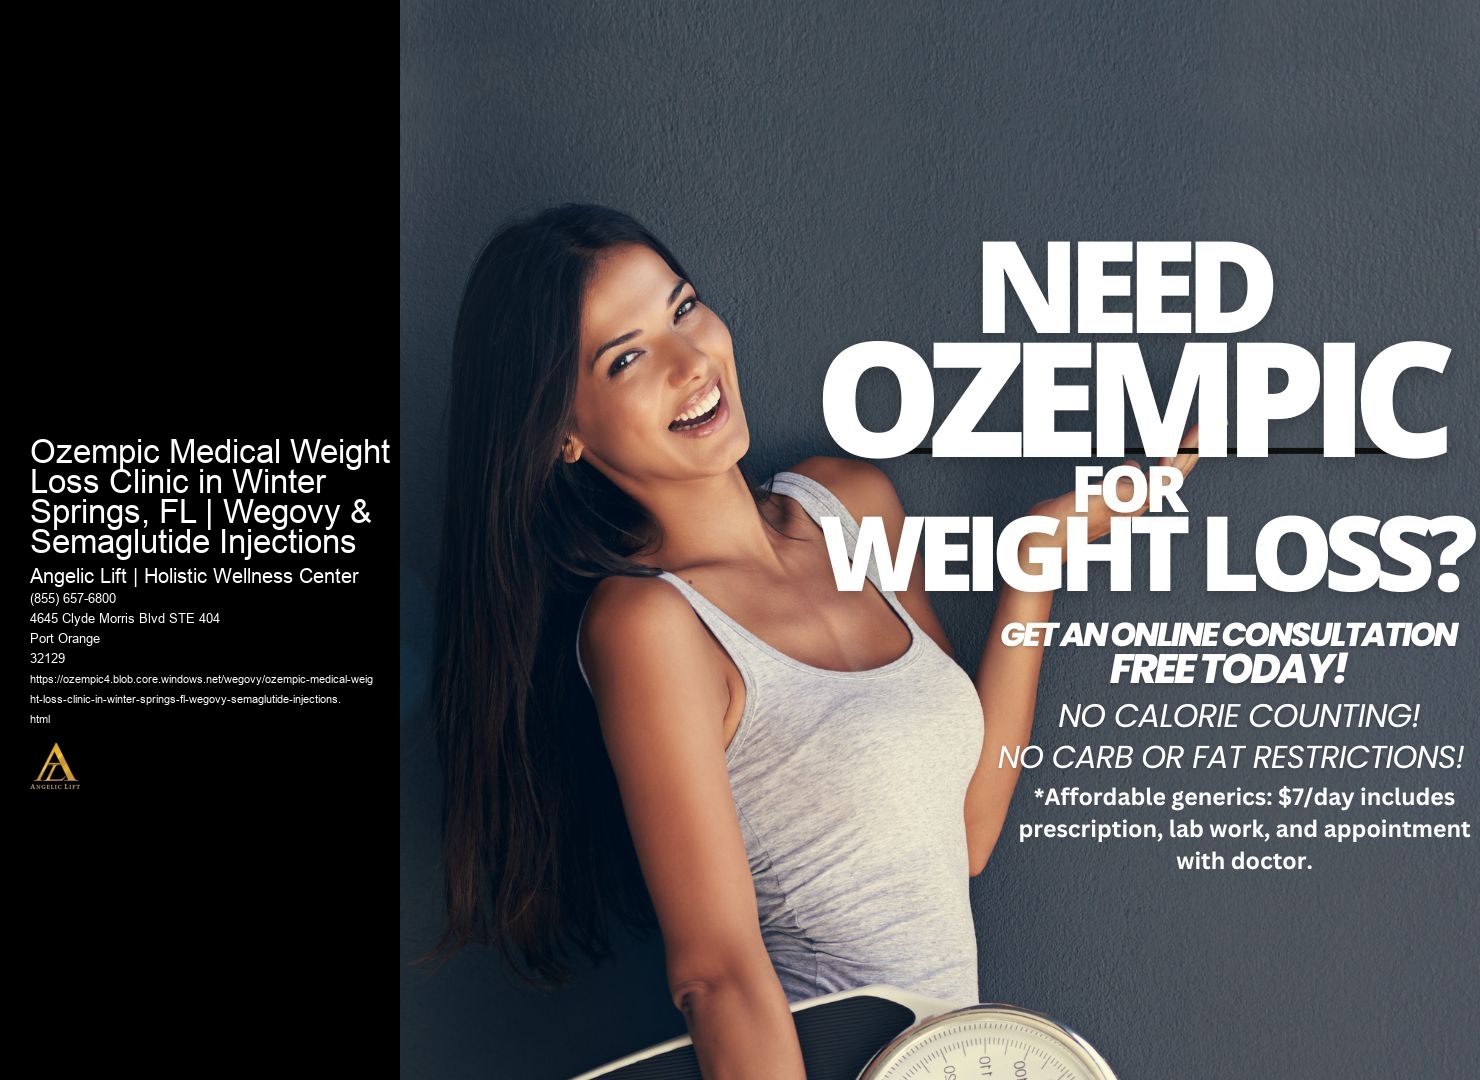 Ozempic Medical Weight Loss Clinic in Winter Springs, FL | Wegovy & Semaglutide Injections